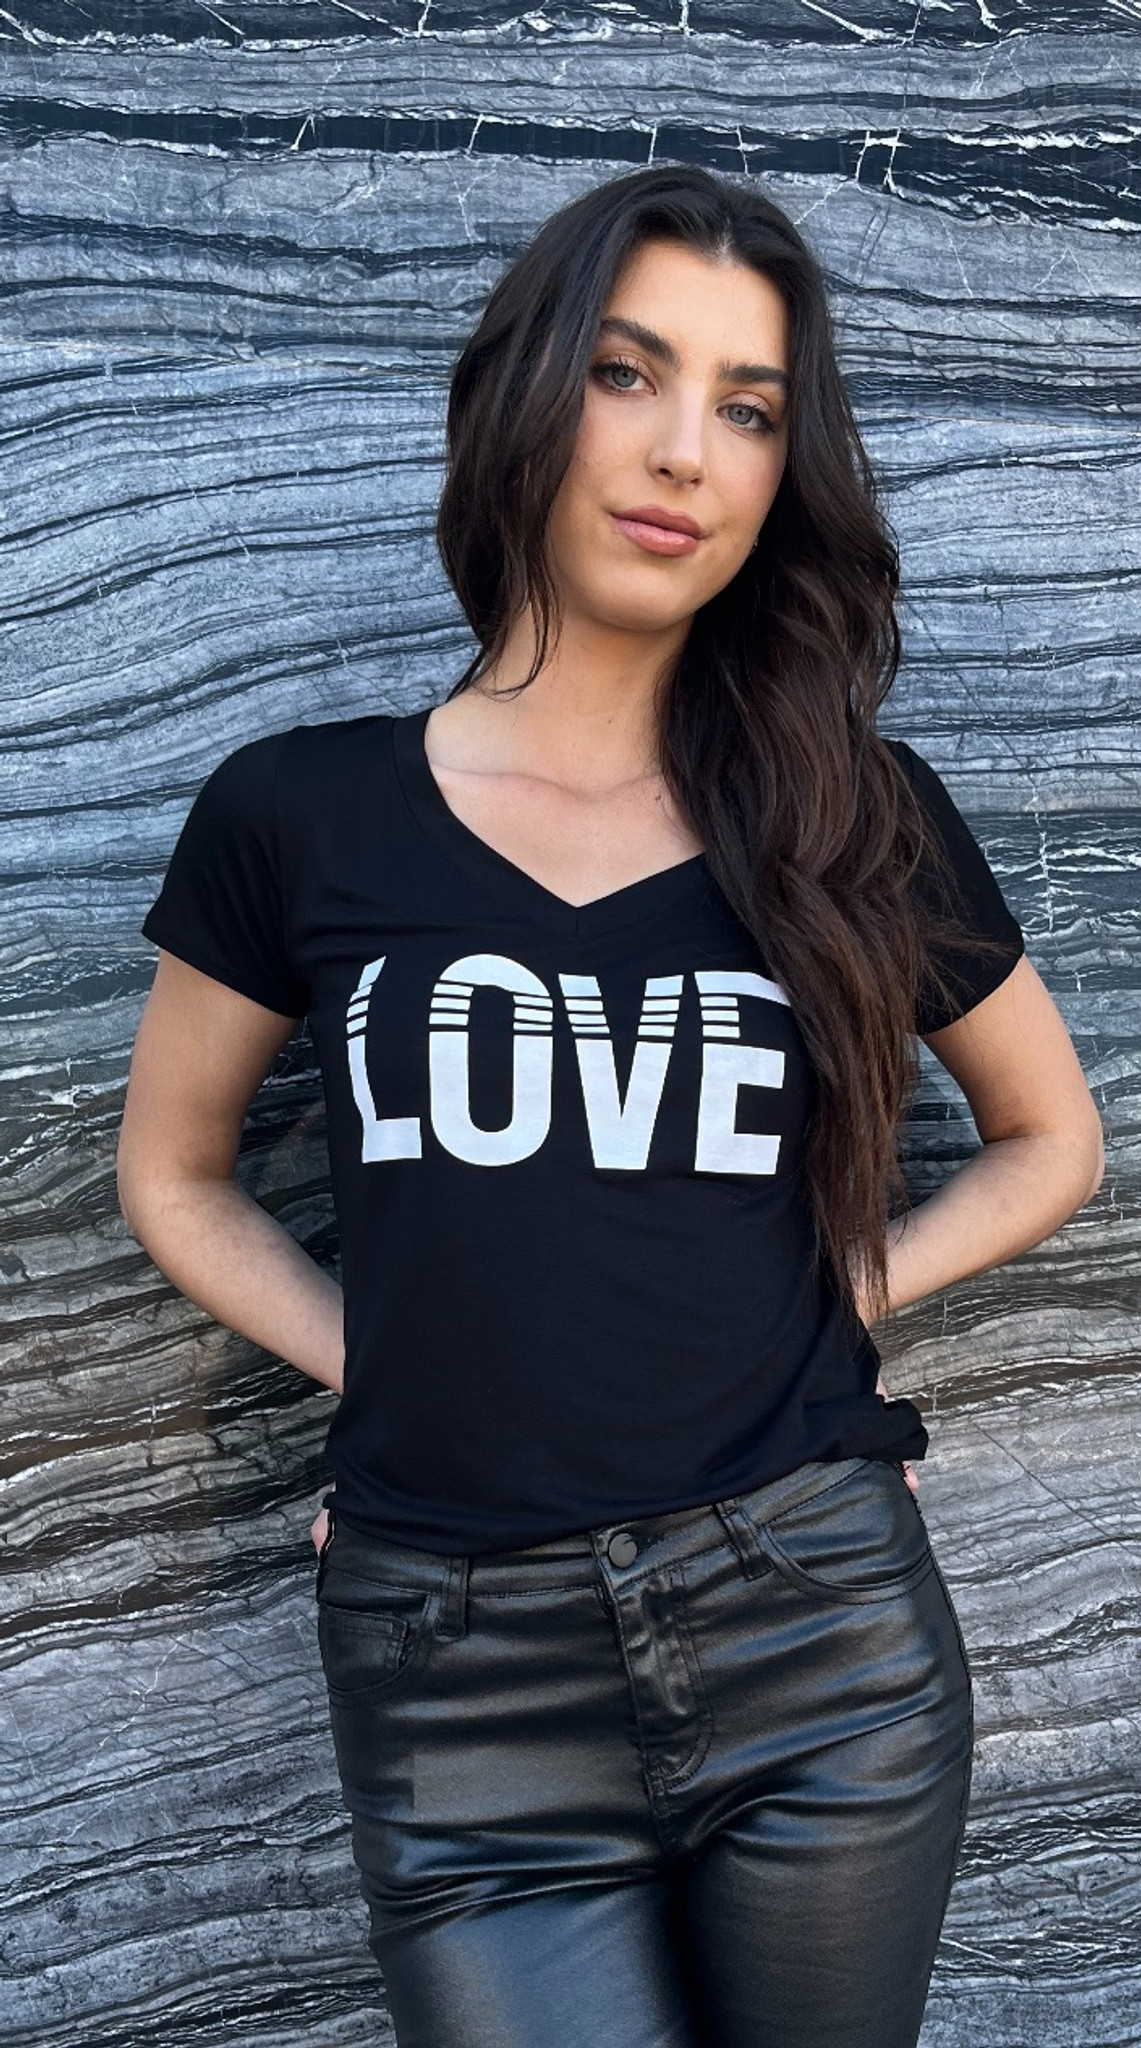 LOVE STRIPE S/S VNECK TEE with SCATTERED STRIPED HEARTS on Back (Black)